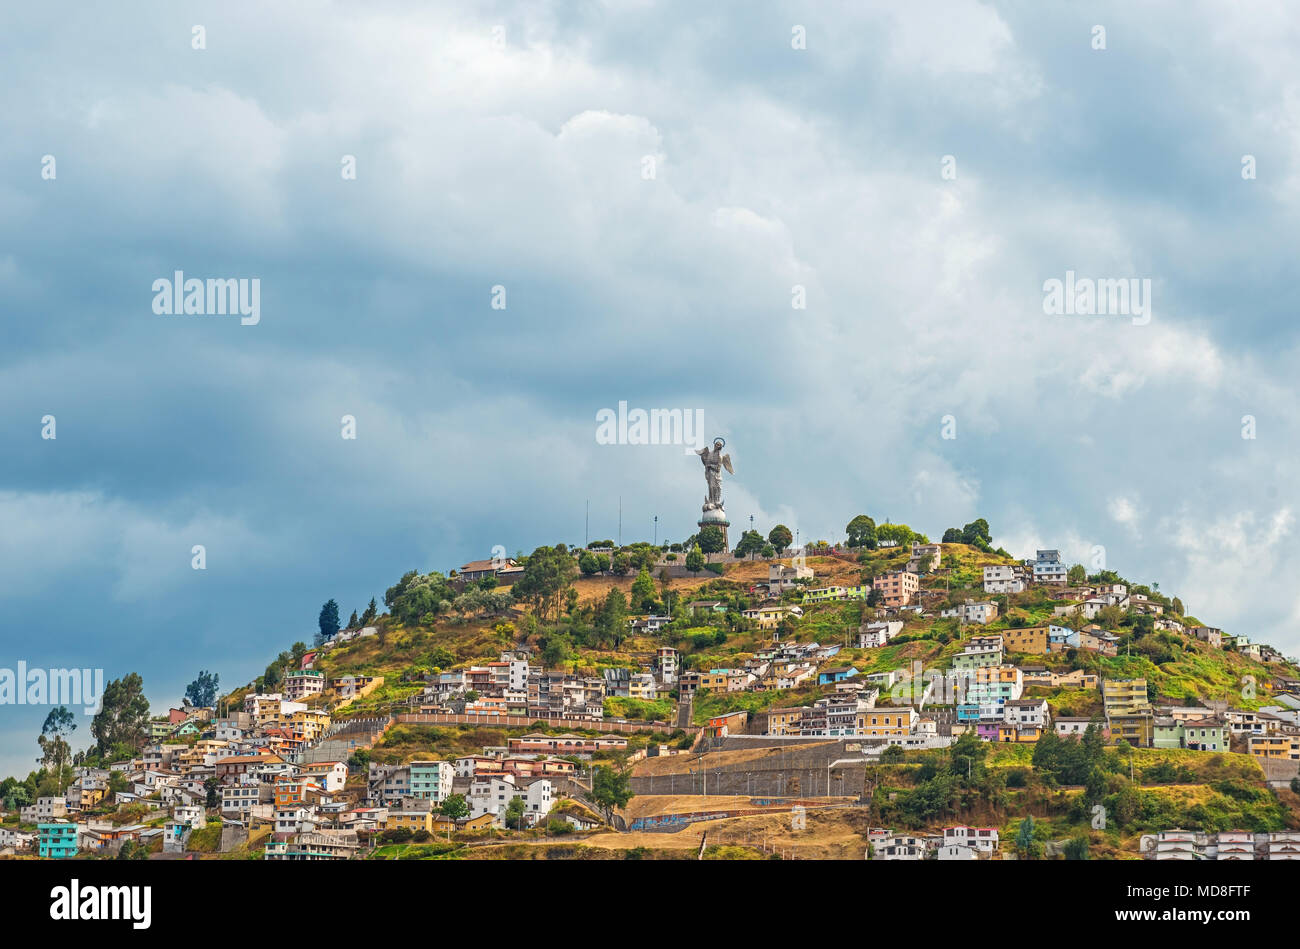 The Panecillo Hill with the Virgin of Quito with traditional colourful housing in the historic city center of Quito, Ecuador, South America. Stock Photo